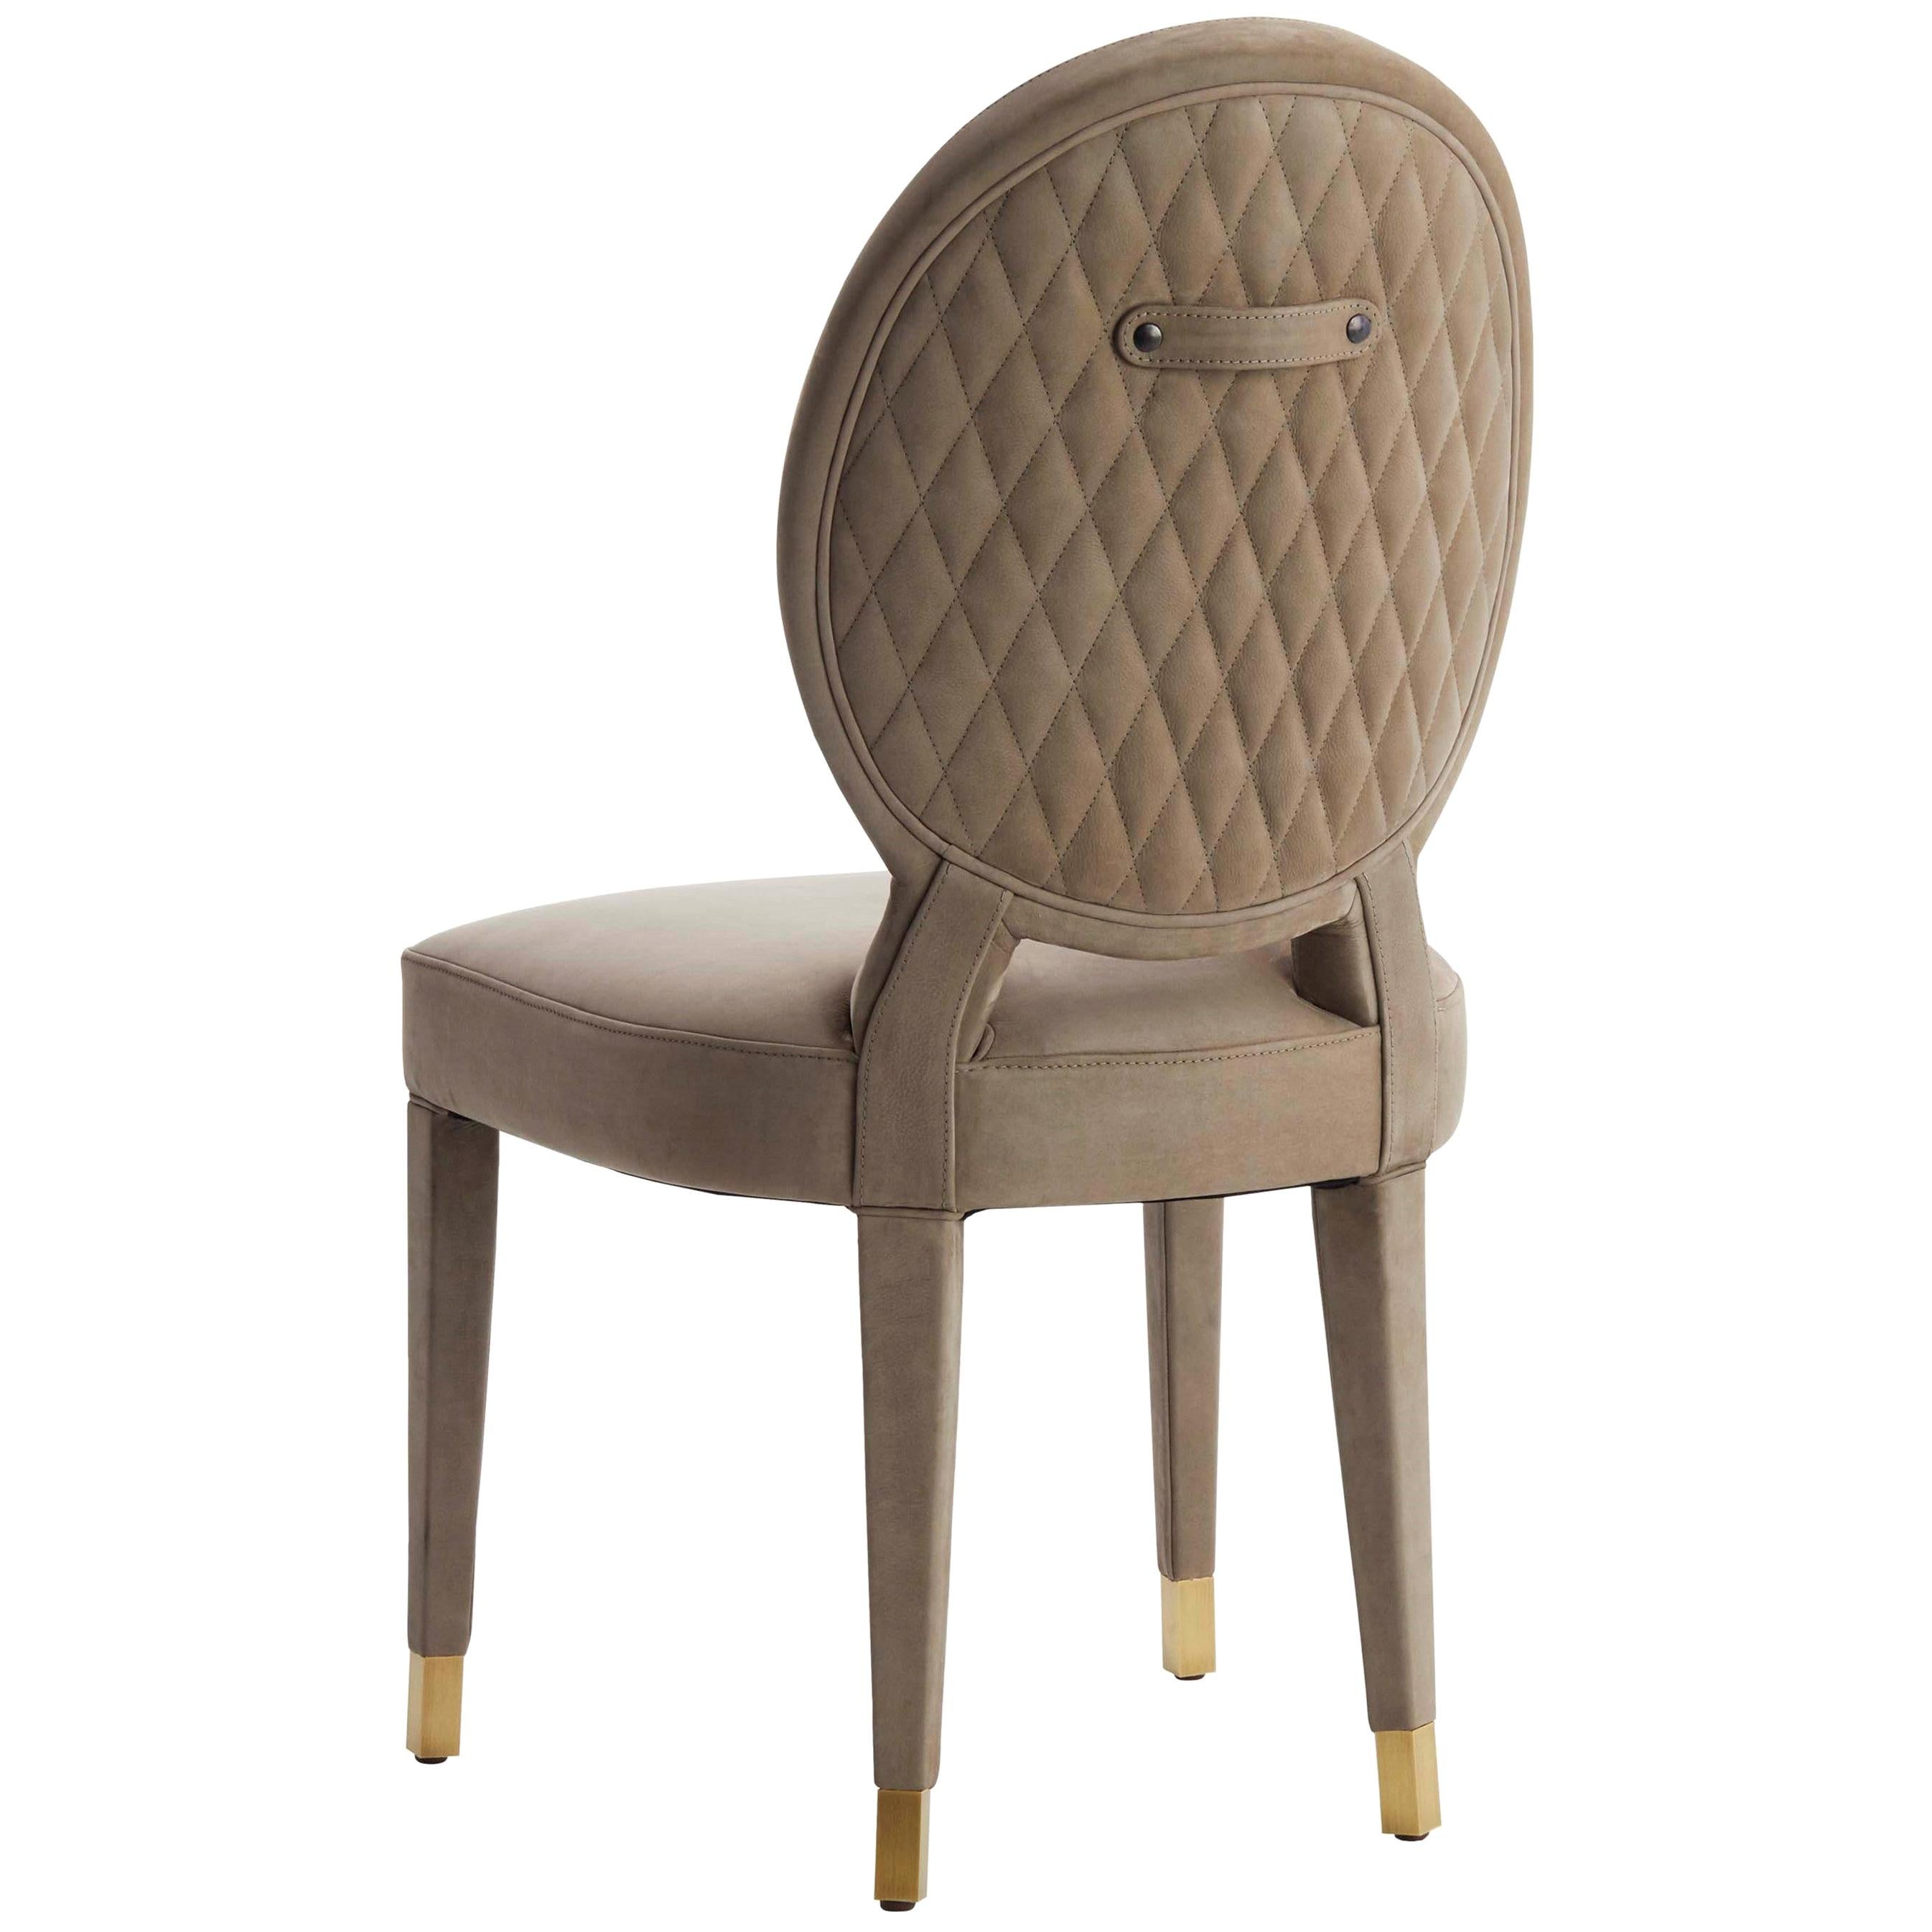 AUREA dining chair in Natural Leather